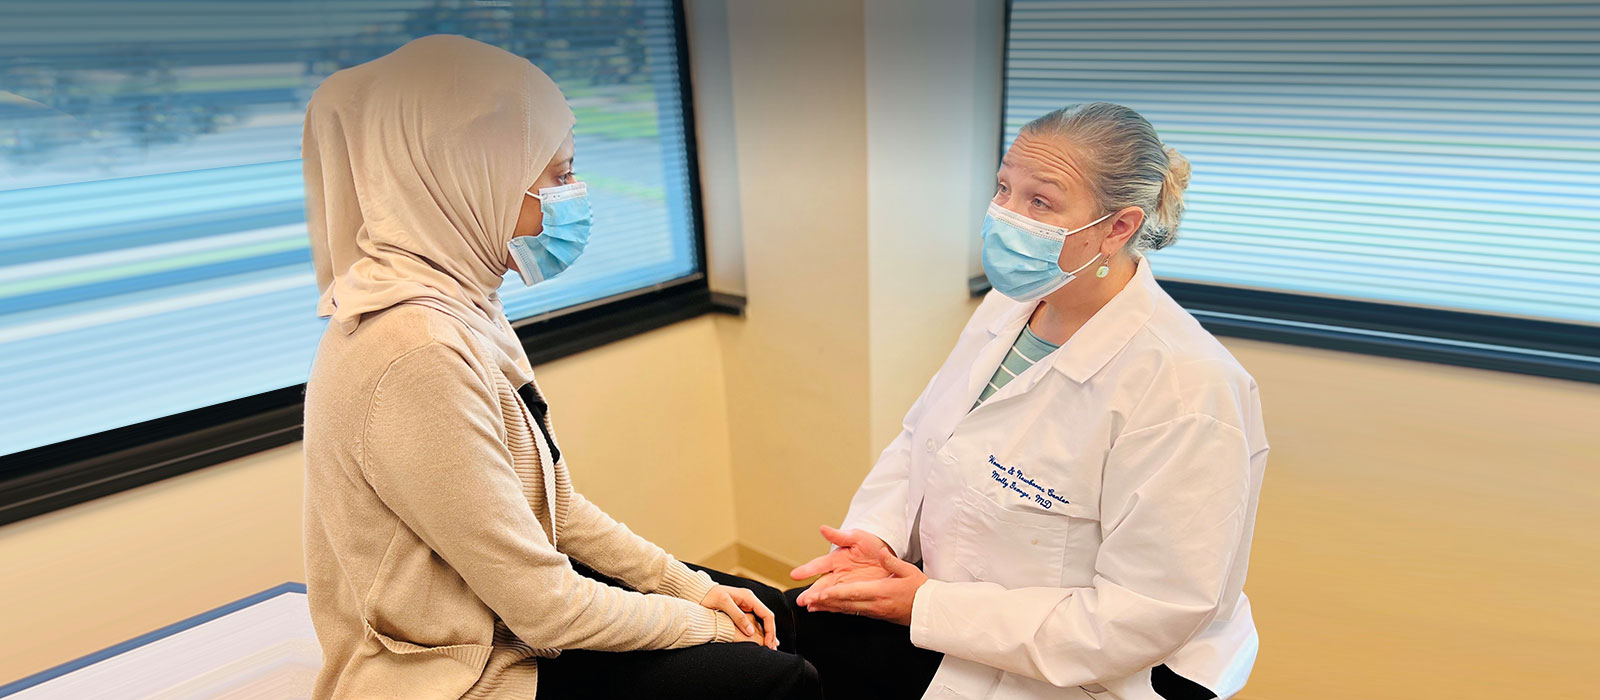 Masked Female patient and doctor conversation